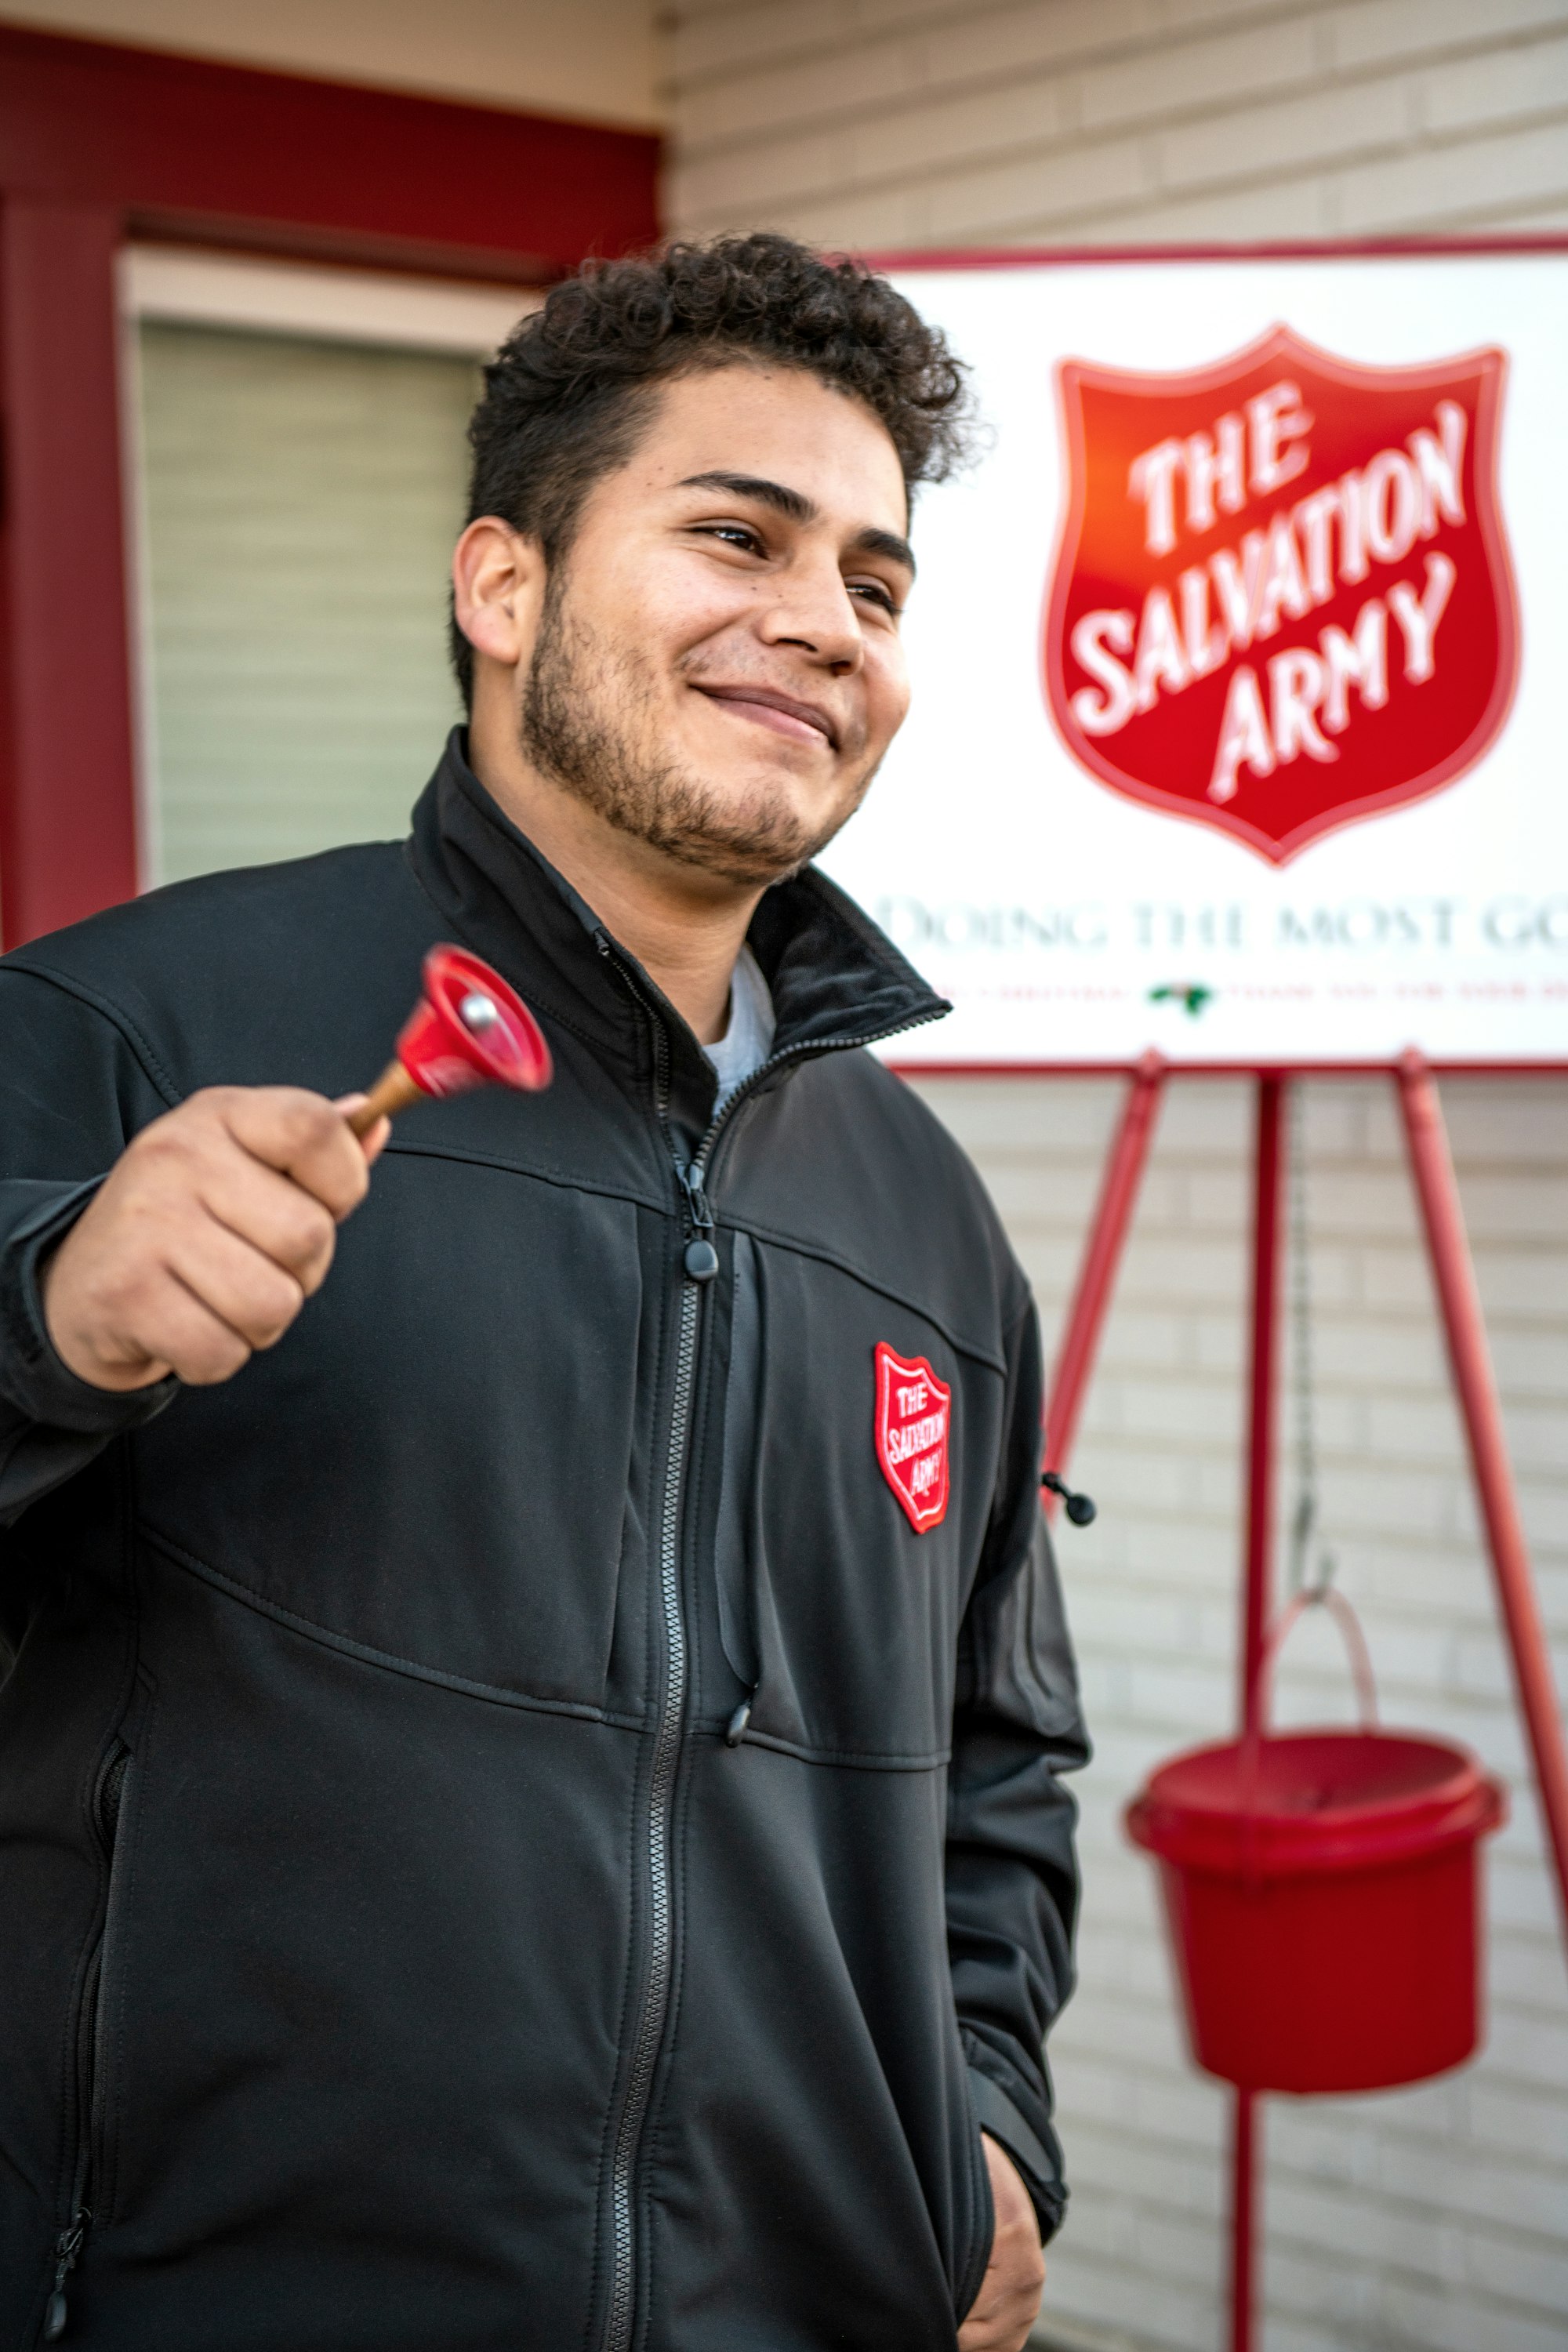 Since 1865, the Salvation Army has been “doing the most good.” Now in over 130 countries, they care for people who are often marginalized and underserved. If you hear their bell ring this Christmas, support them generously. 🔔 